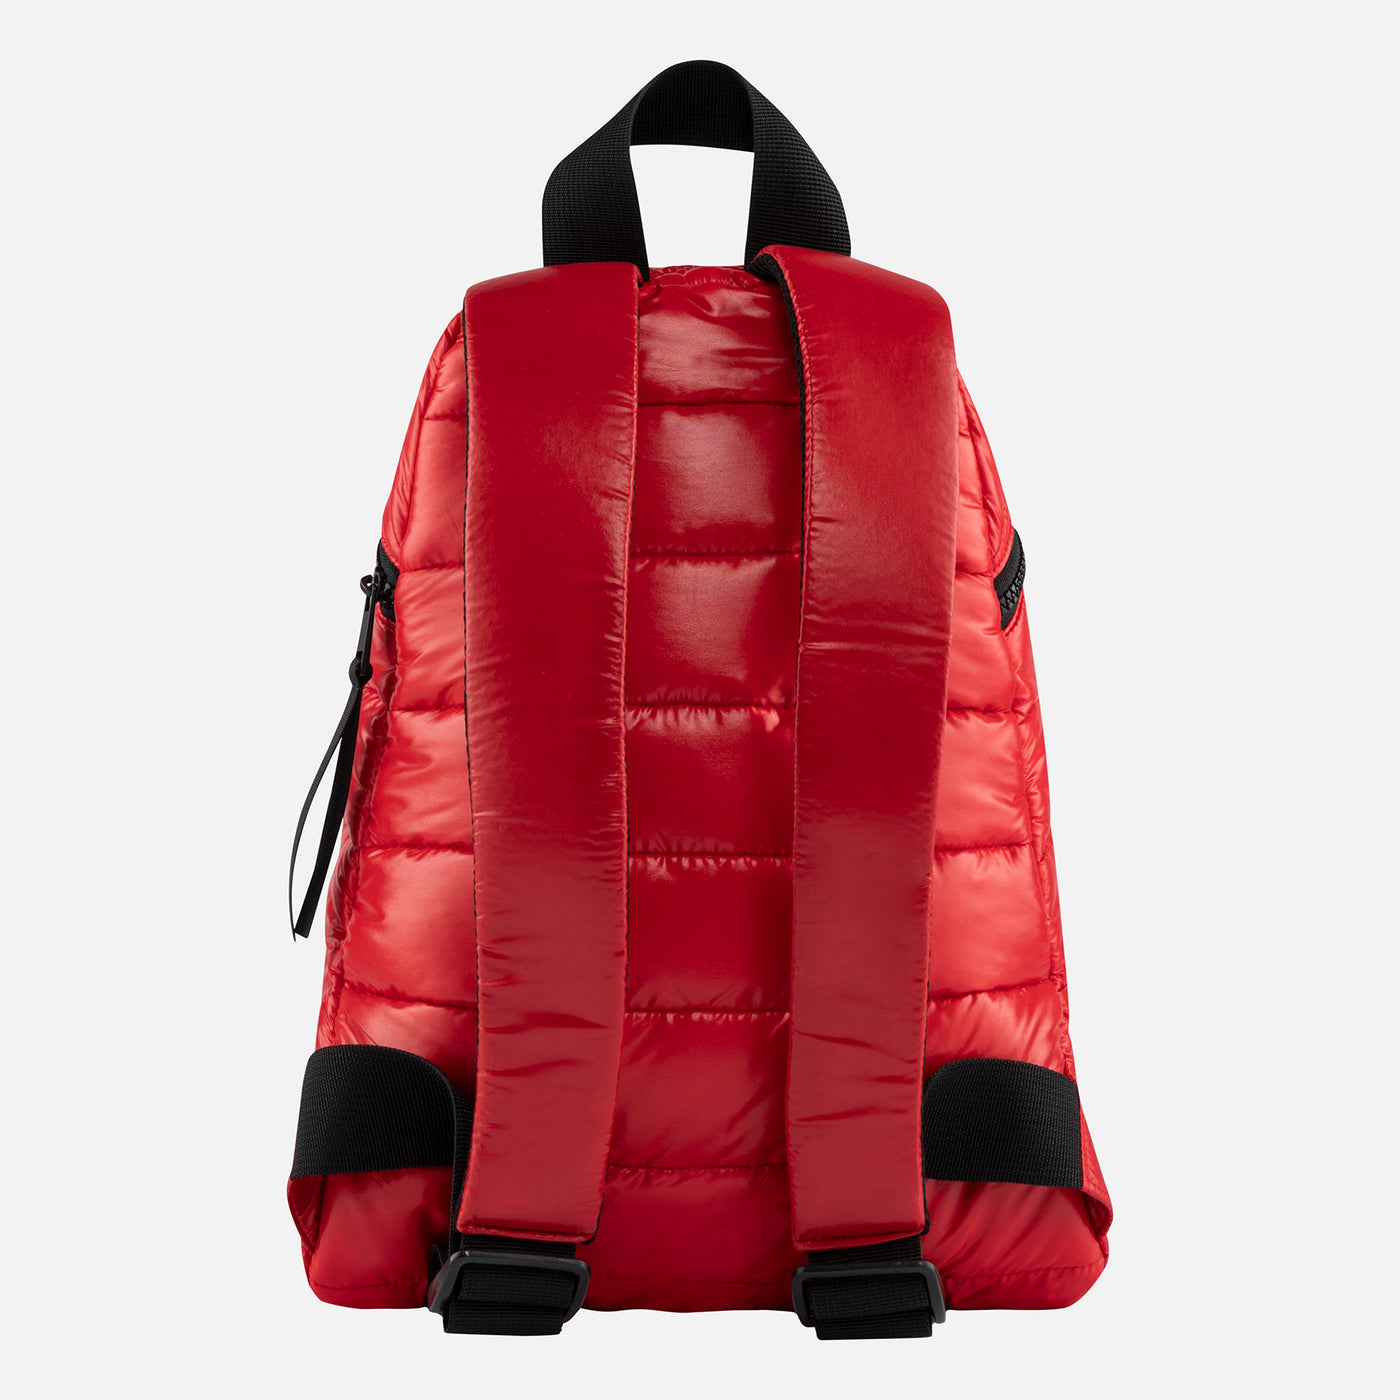 PUFFY BAG RED